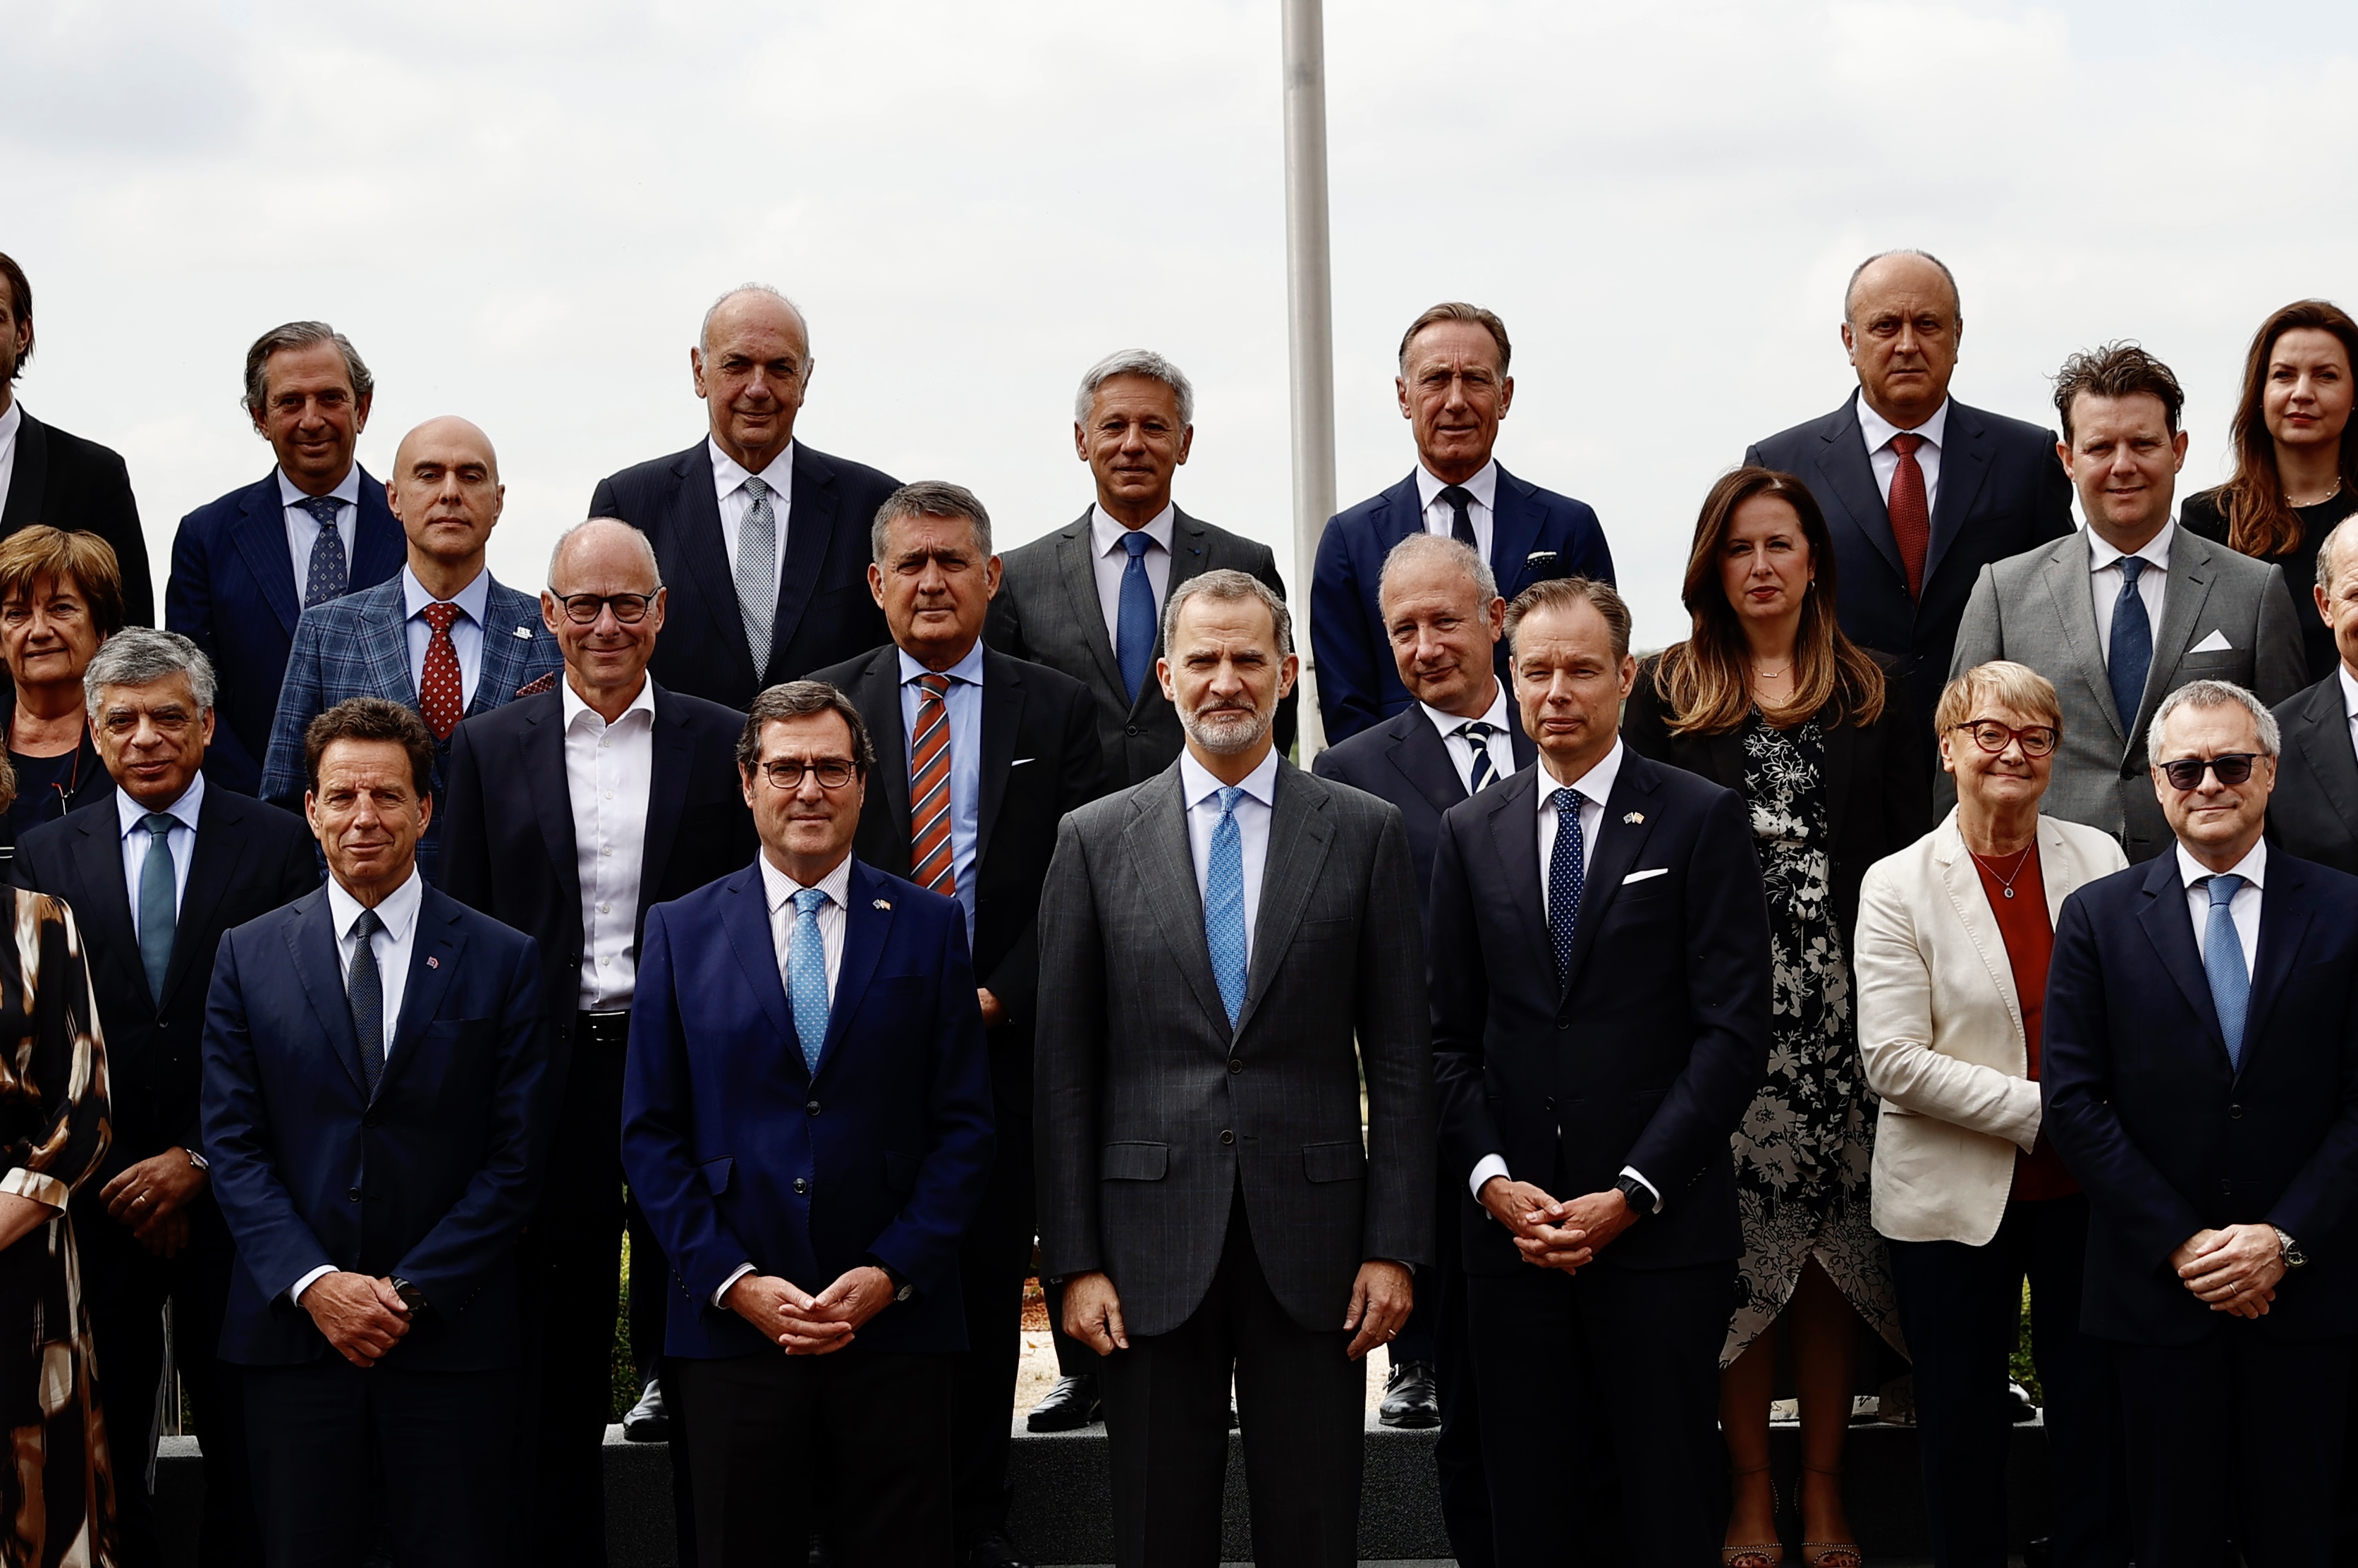 BusinessEurope Presidents' Council